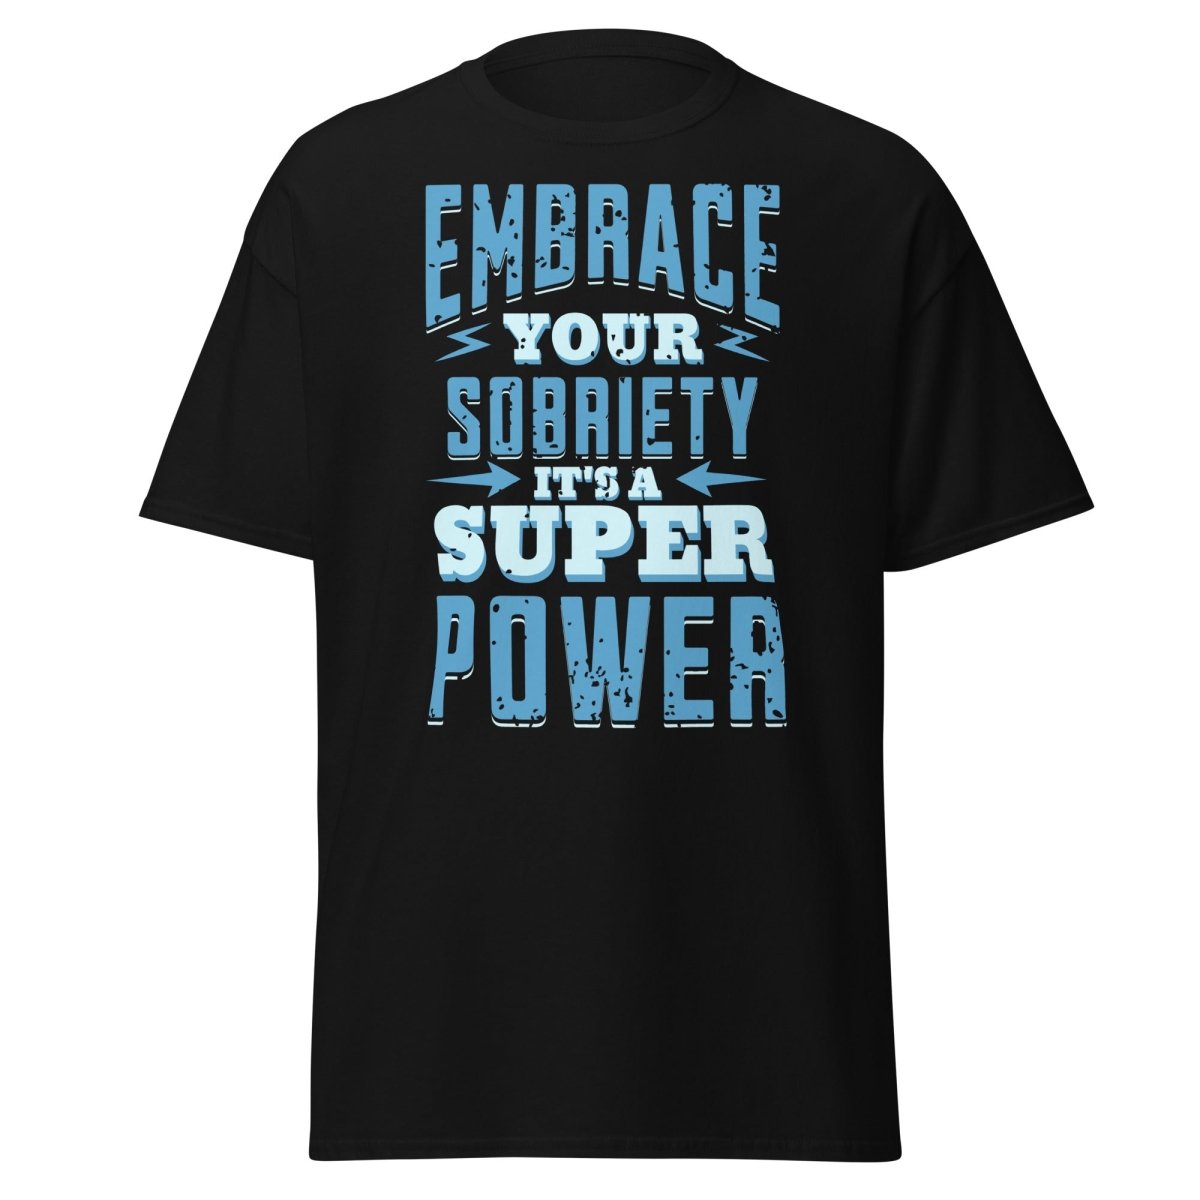 "Embrace Your Sobriety: It's a Superpower" Men's Classic Tee - Black / S | Sobervation